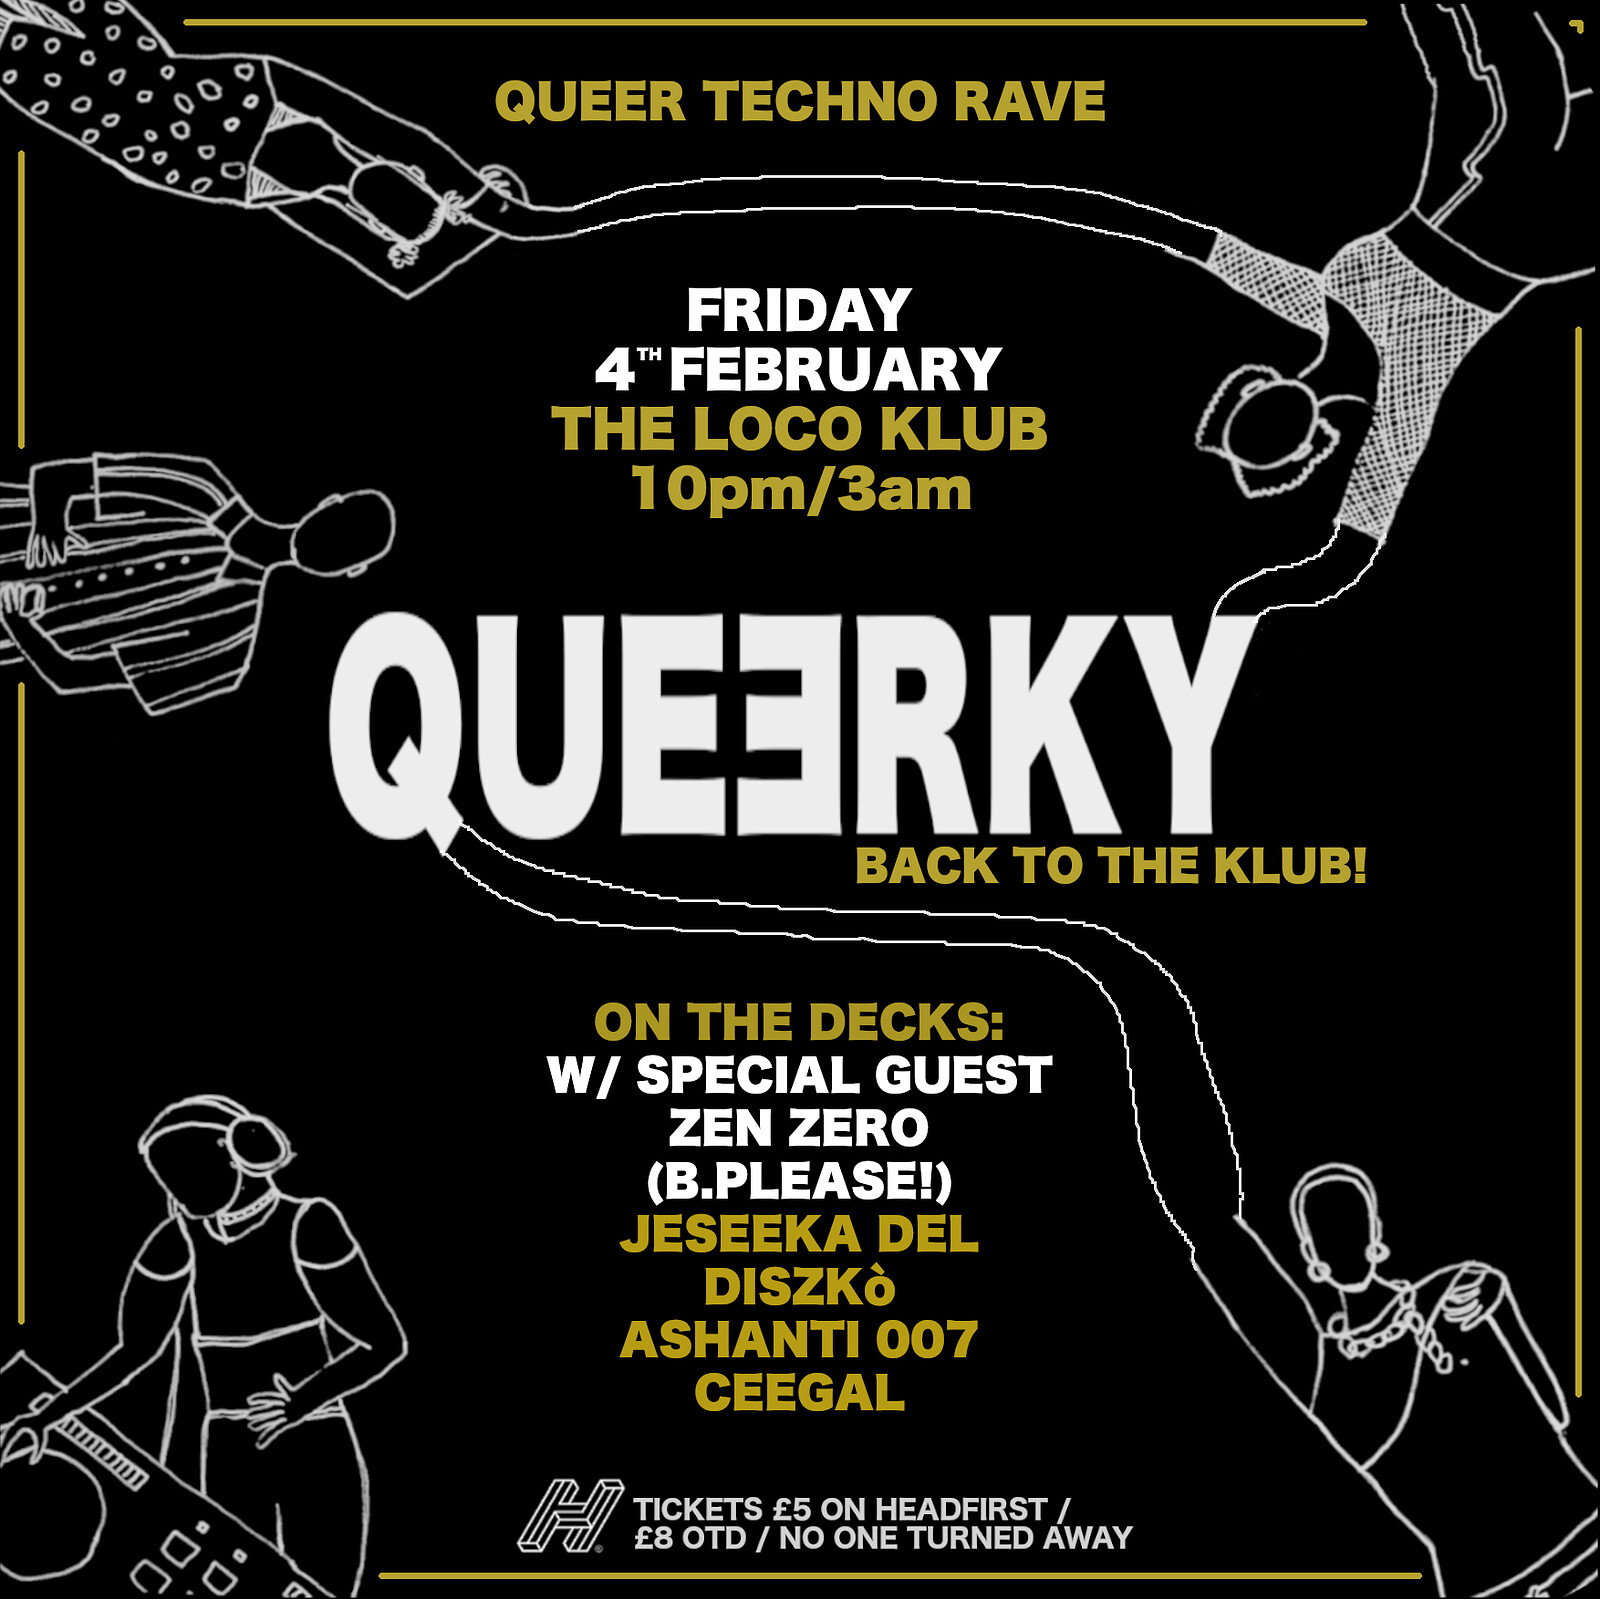 QUEERKY - Back to the Klub w/ Special Guest ZenZe at The Loco Klub